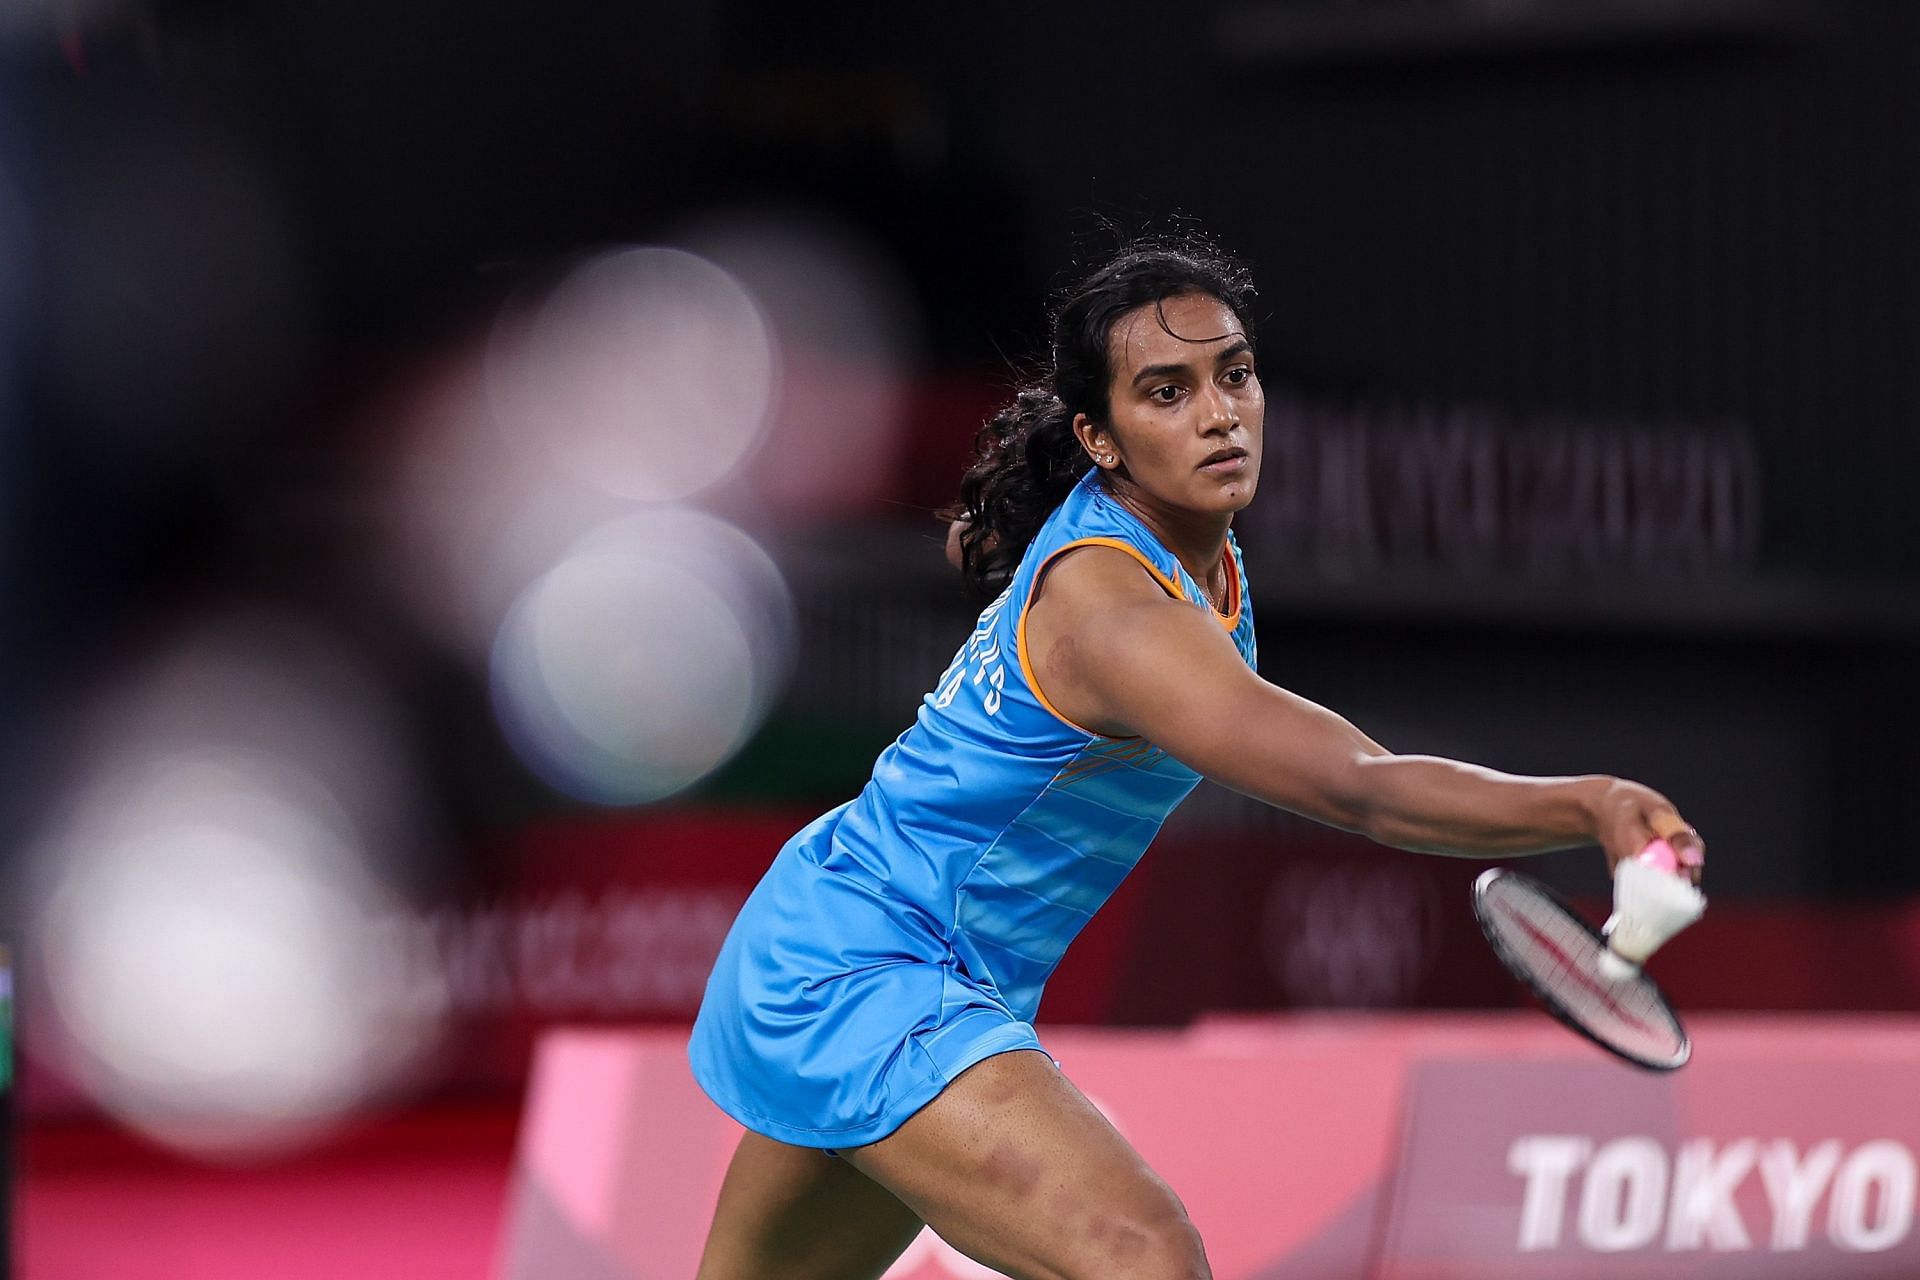 PV Sindhu in action at the Tokyo Olympics (Image courtesy: Getty Images)